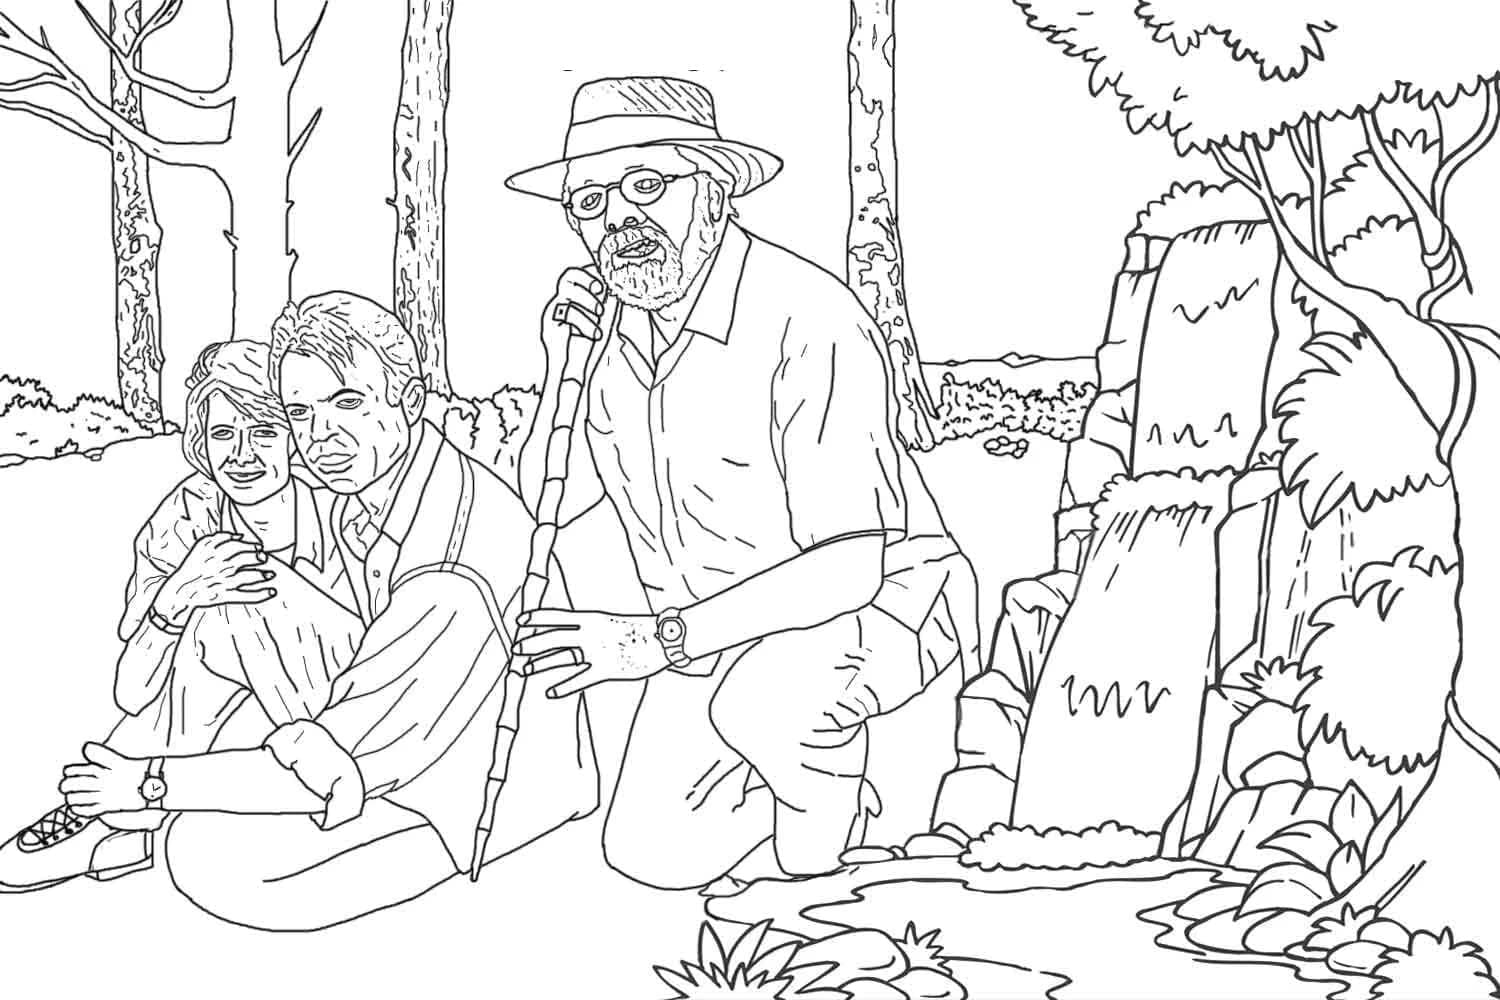 Jurassic Park 7 coloring page